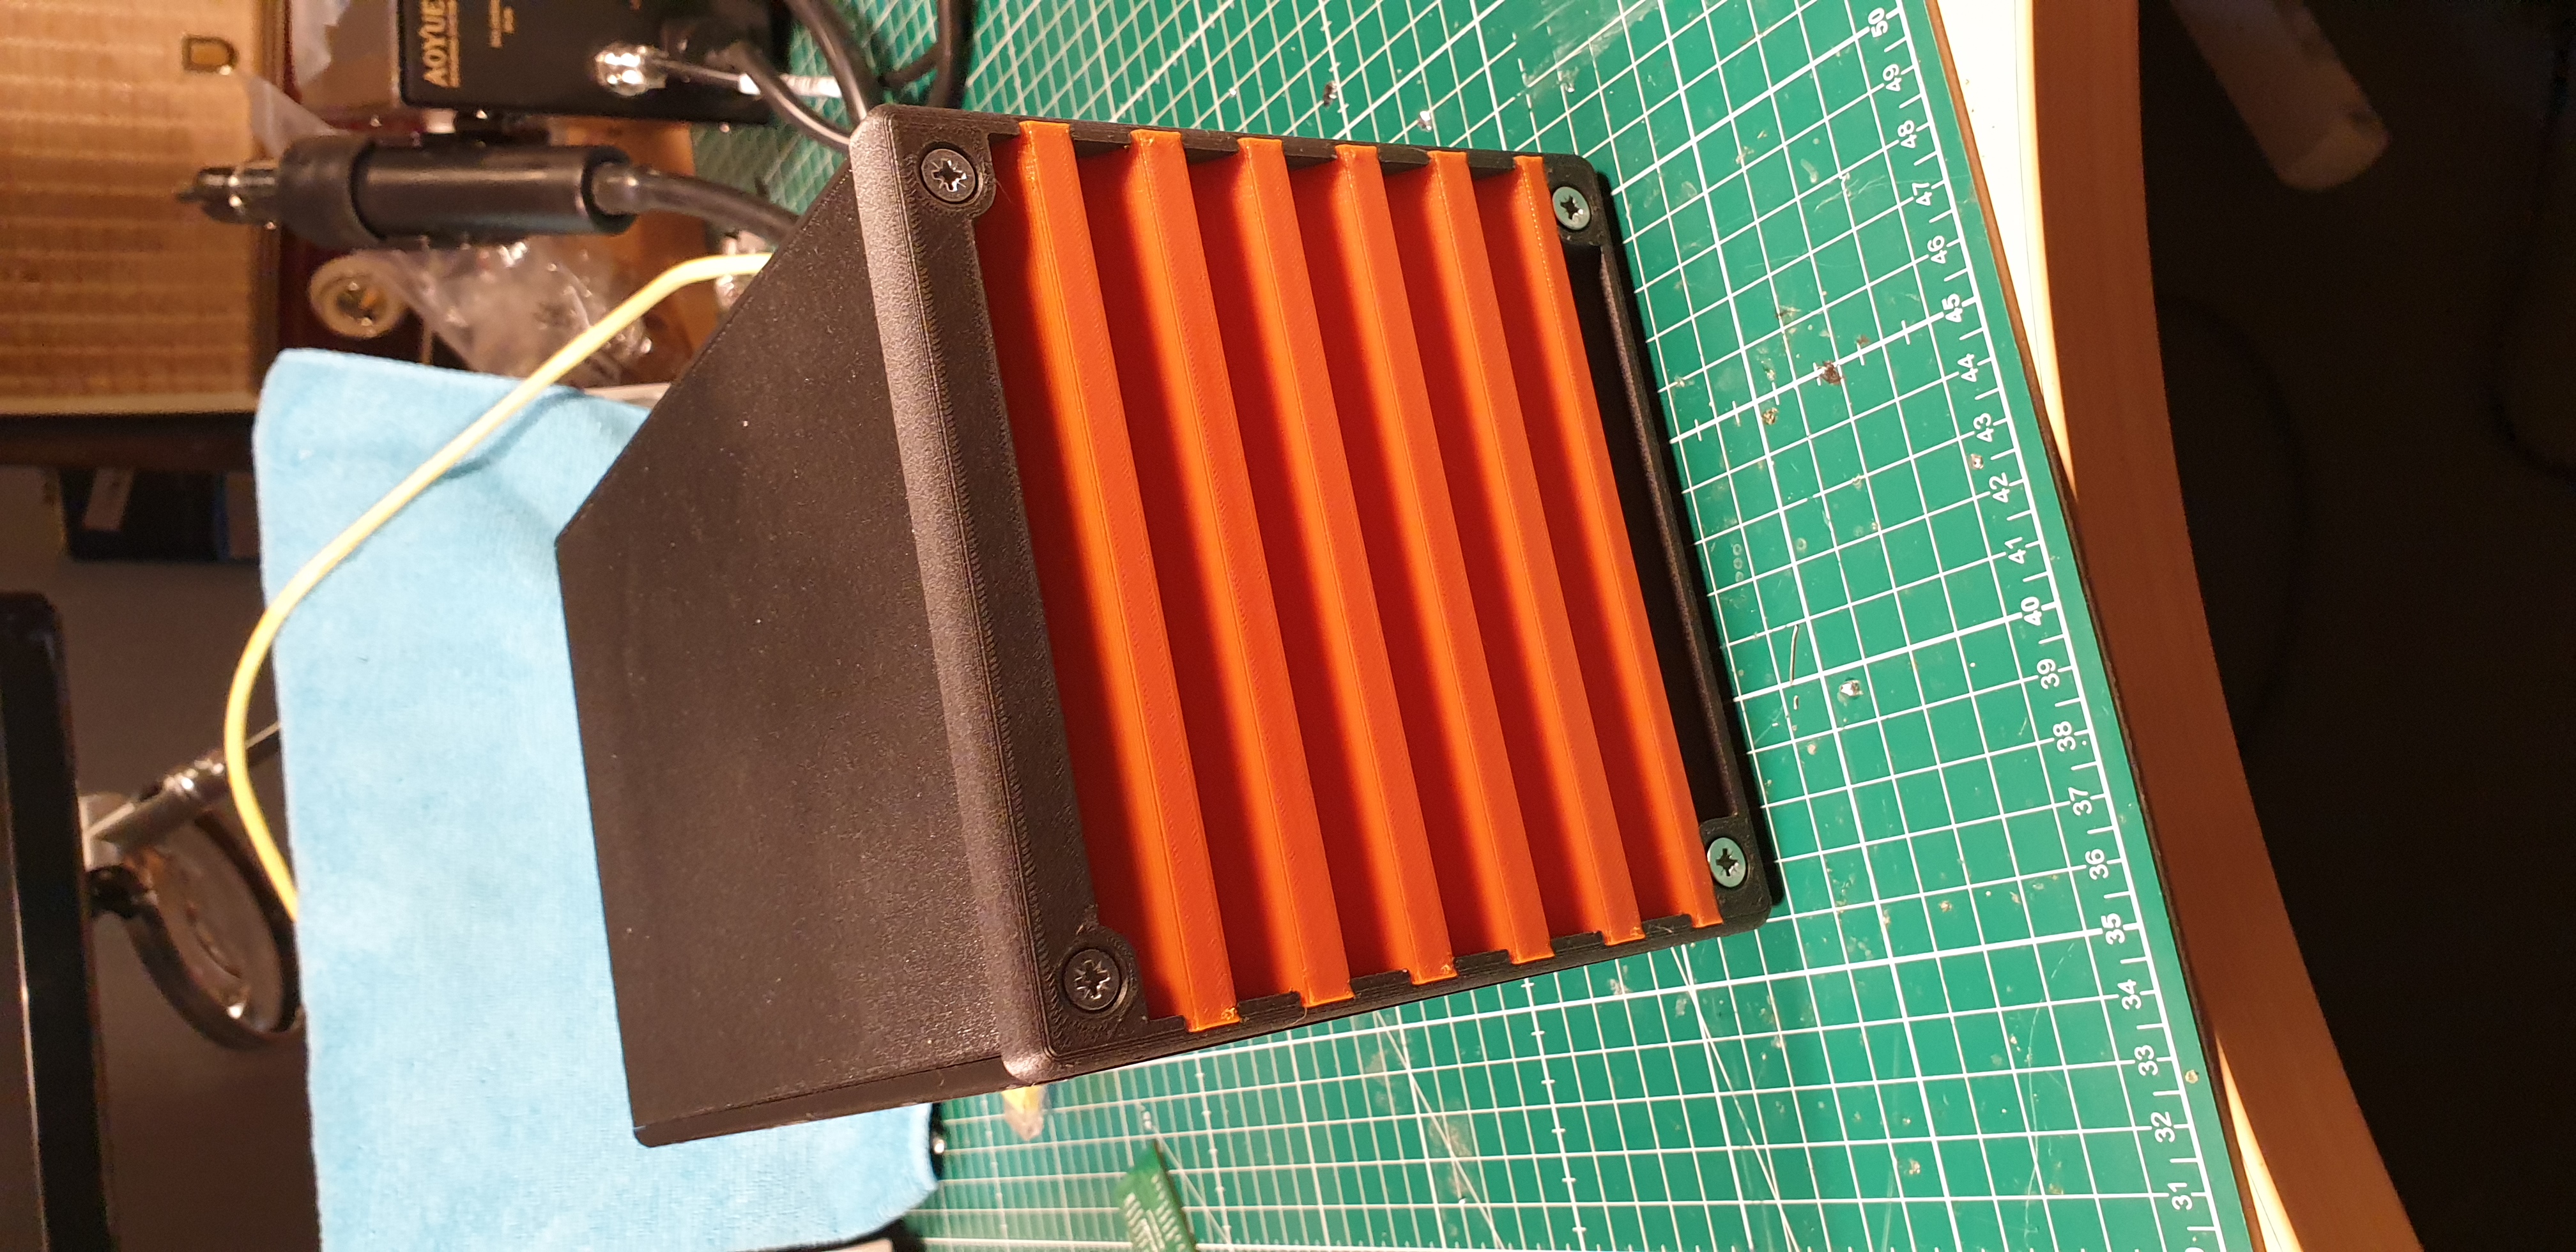 Raspberry Pi Syncthing Case for Offsite Backup!